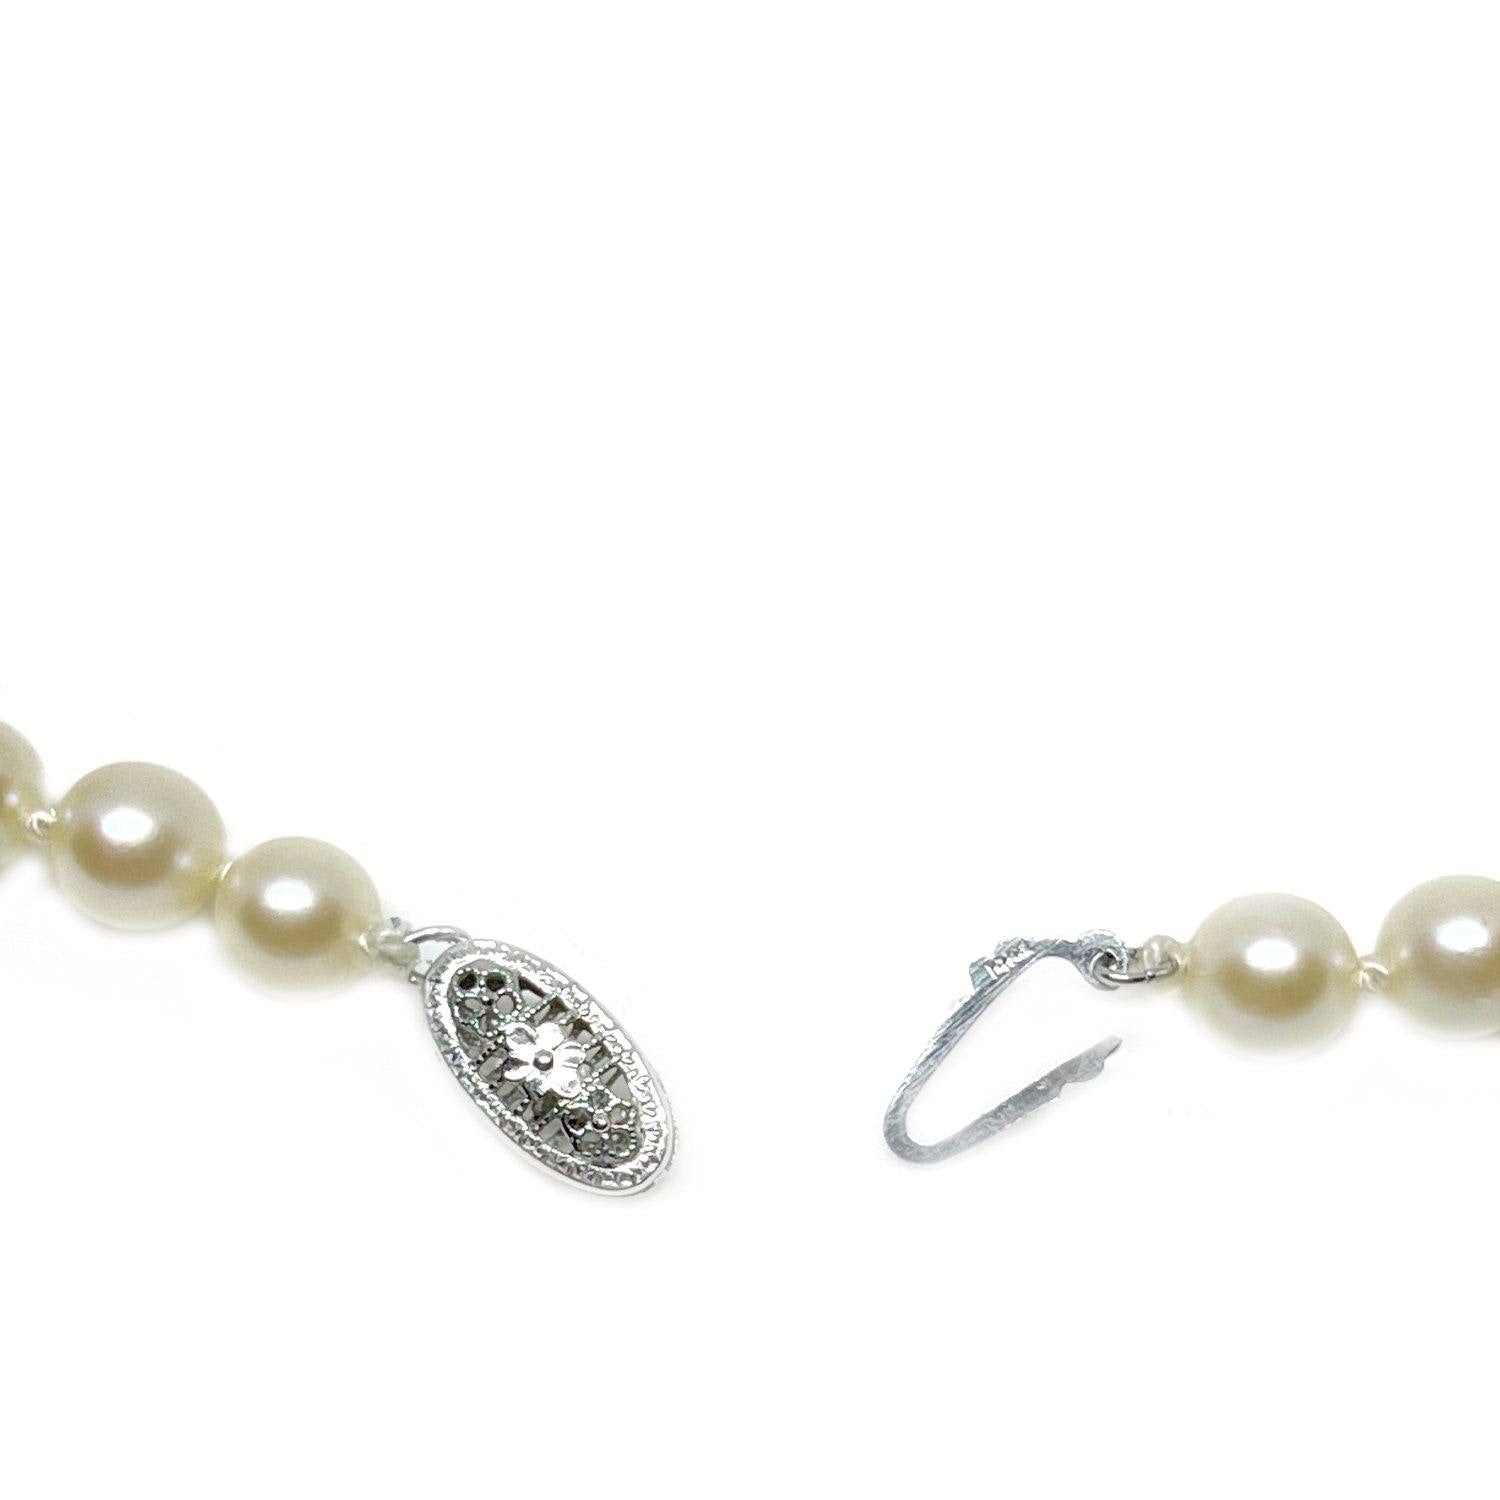 Graduated Blossom Japanese Saltwater Cultured Akoya Pearl Strand - 14K White Gold 15.50 Inch